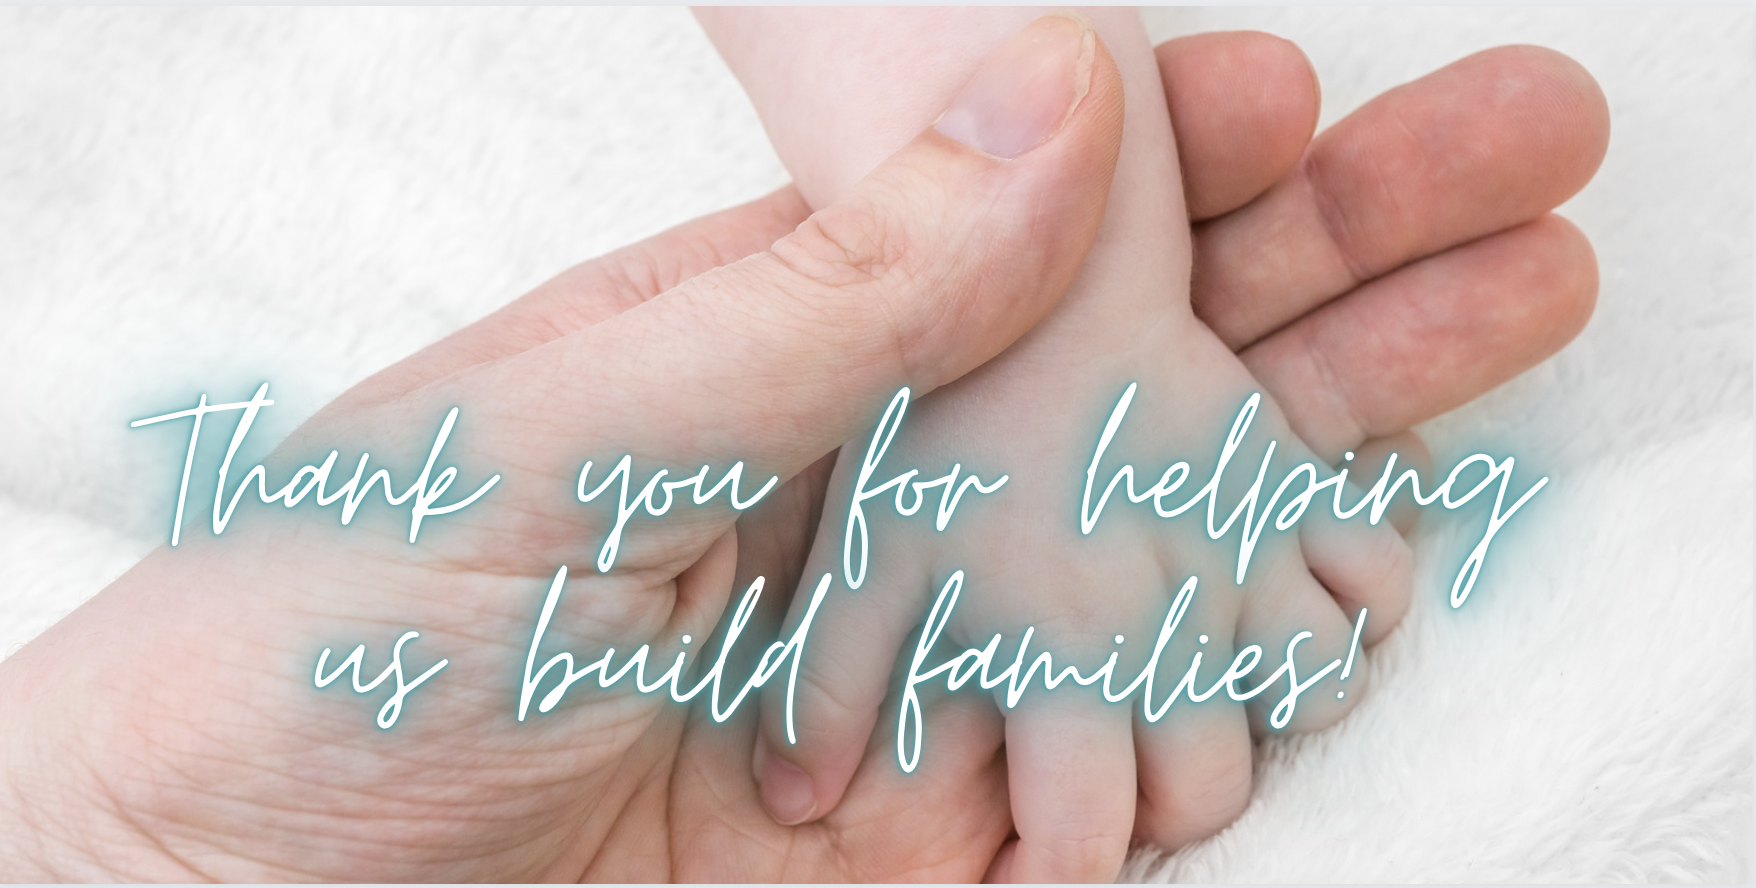 Thank you for helping us build families